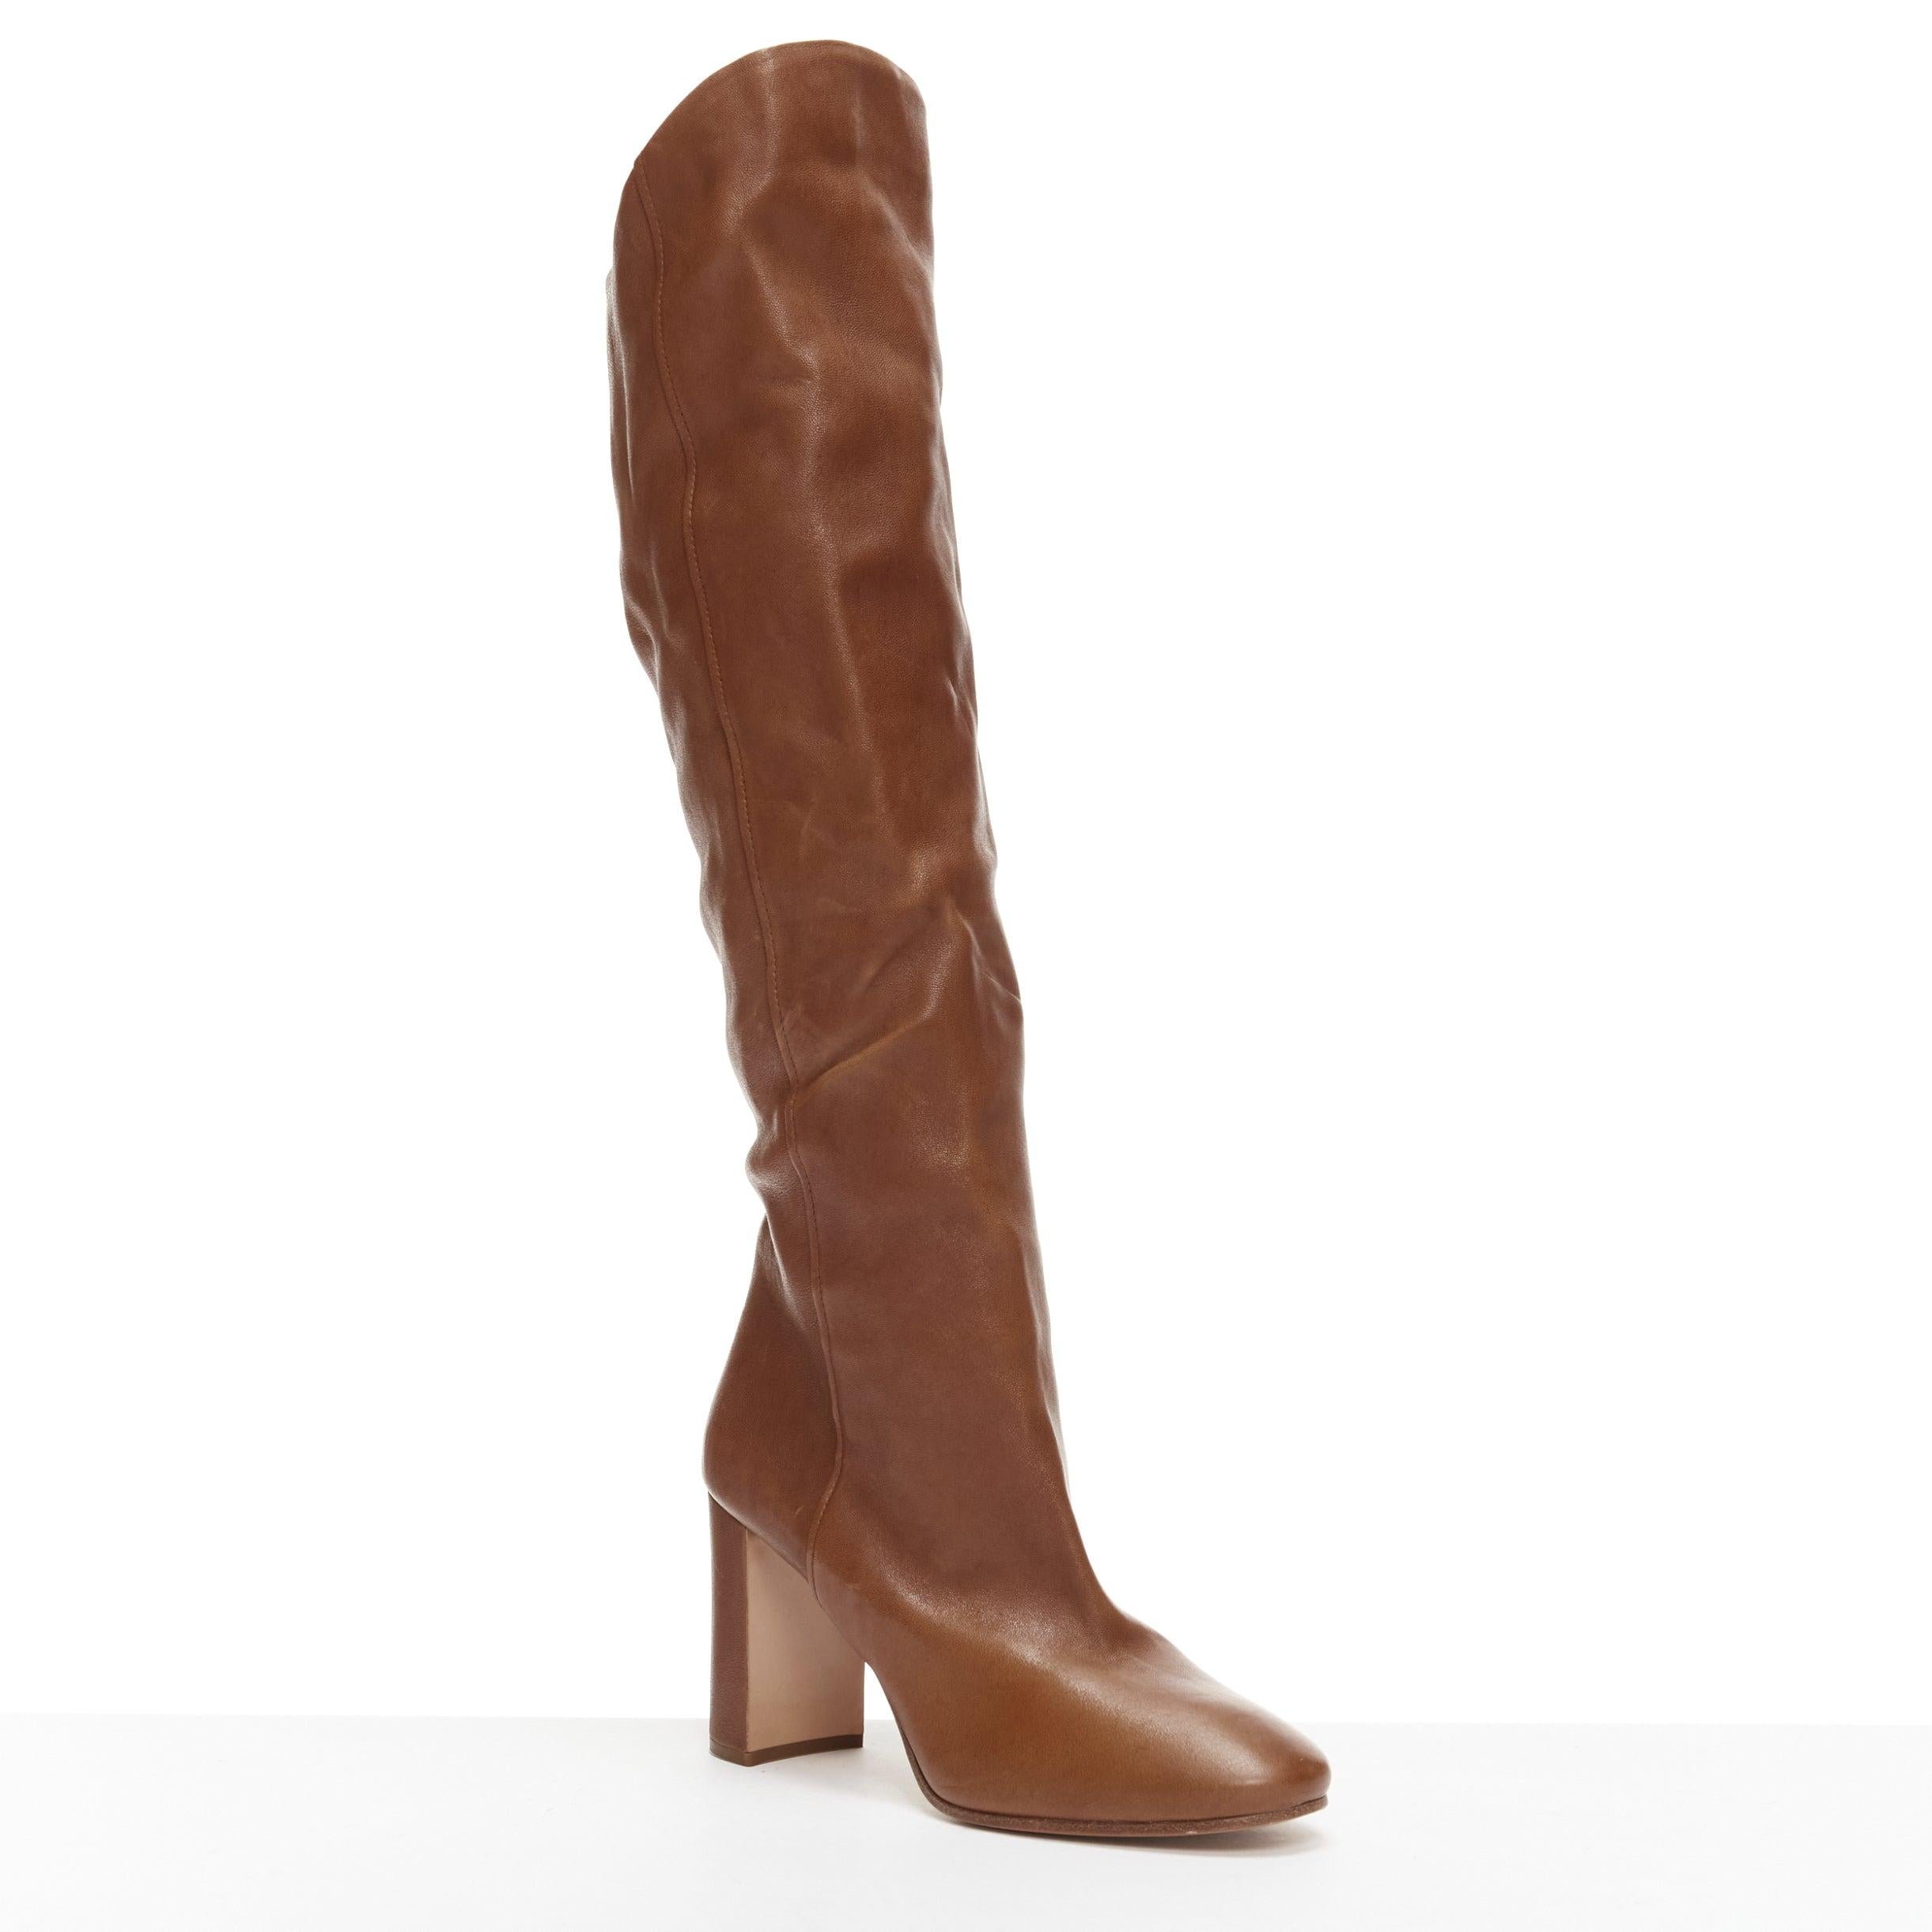 PRADA brown leather high low top almond toe block heel tall boots EU38
Reference: AAWC/A00948
Brand: Prada
Designer: Miuccia Prada
Material: Leather
Color: Brown
Pattern: Solid
Closure: Slip On
Lining: Brown Leather
Made in: